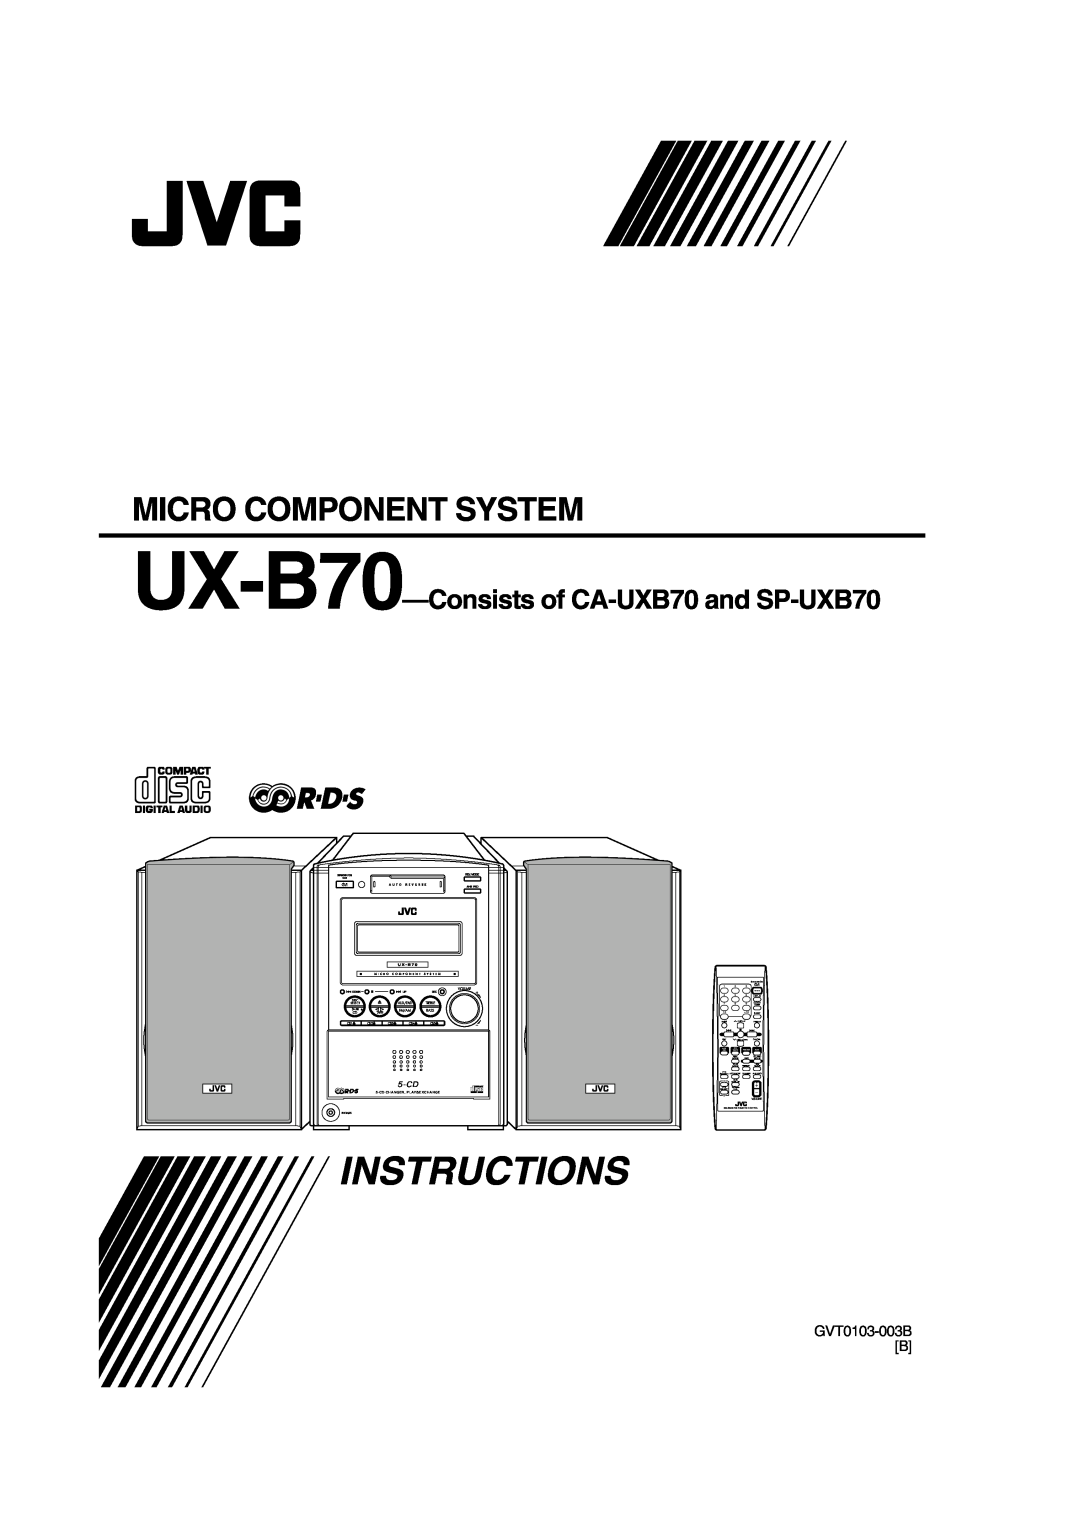 JVC manual GVT0103-003BB, Instructions, Micro Component System, UX-B70-Consistsof CA-UXB70and SP-UXB70, 5-CD 